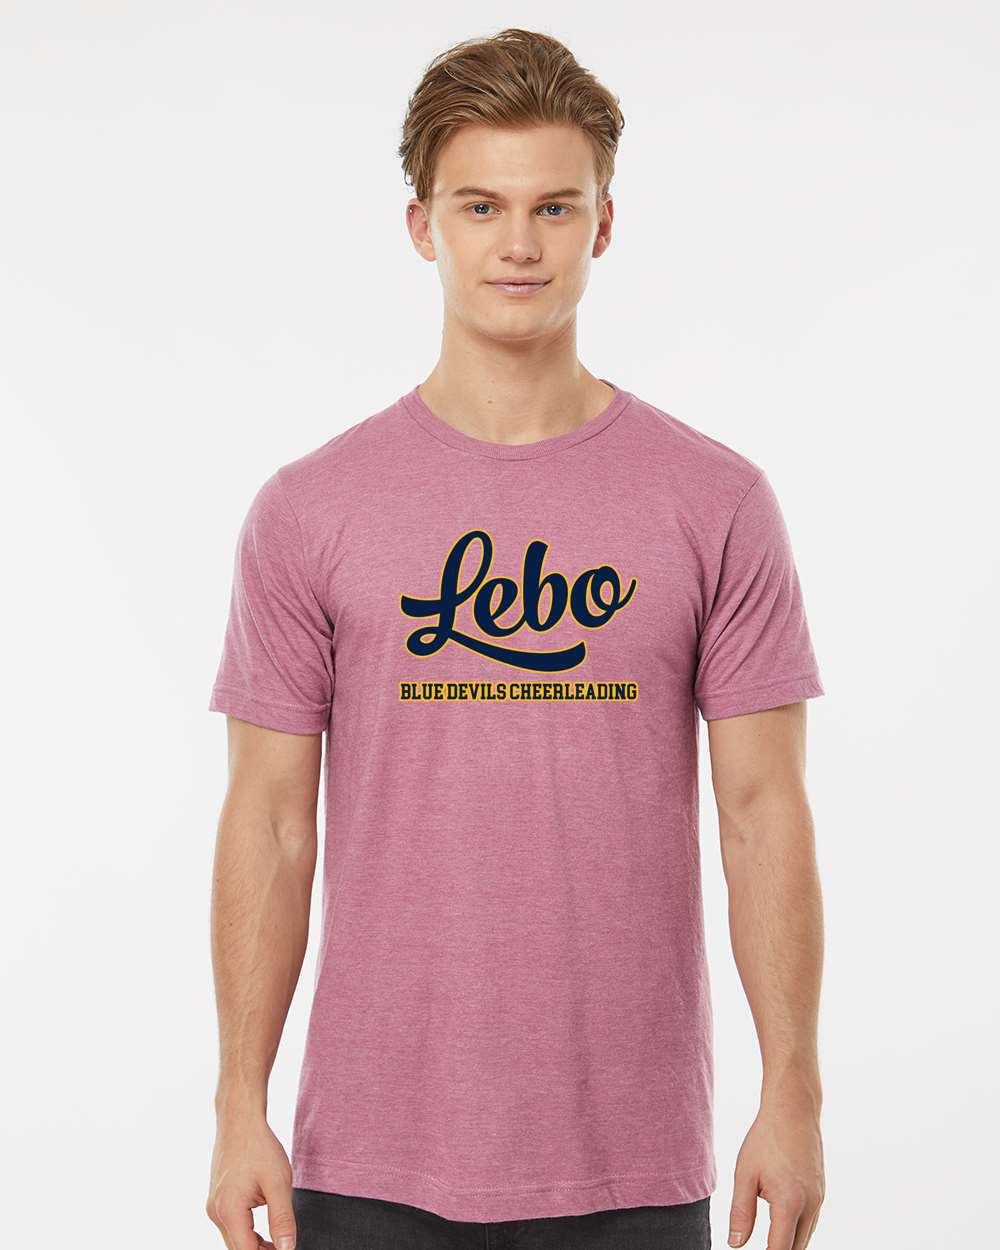 PINK-OUT LEBO CHEER Tee